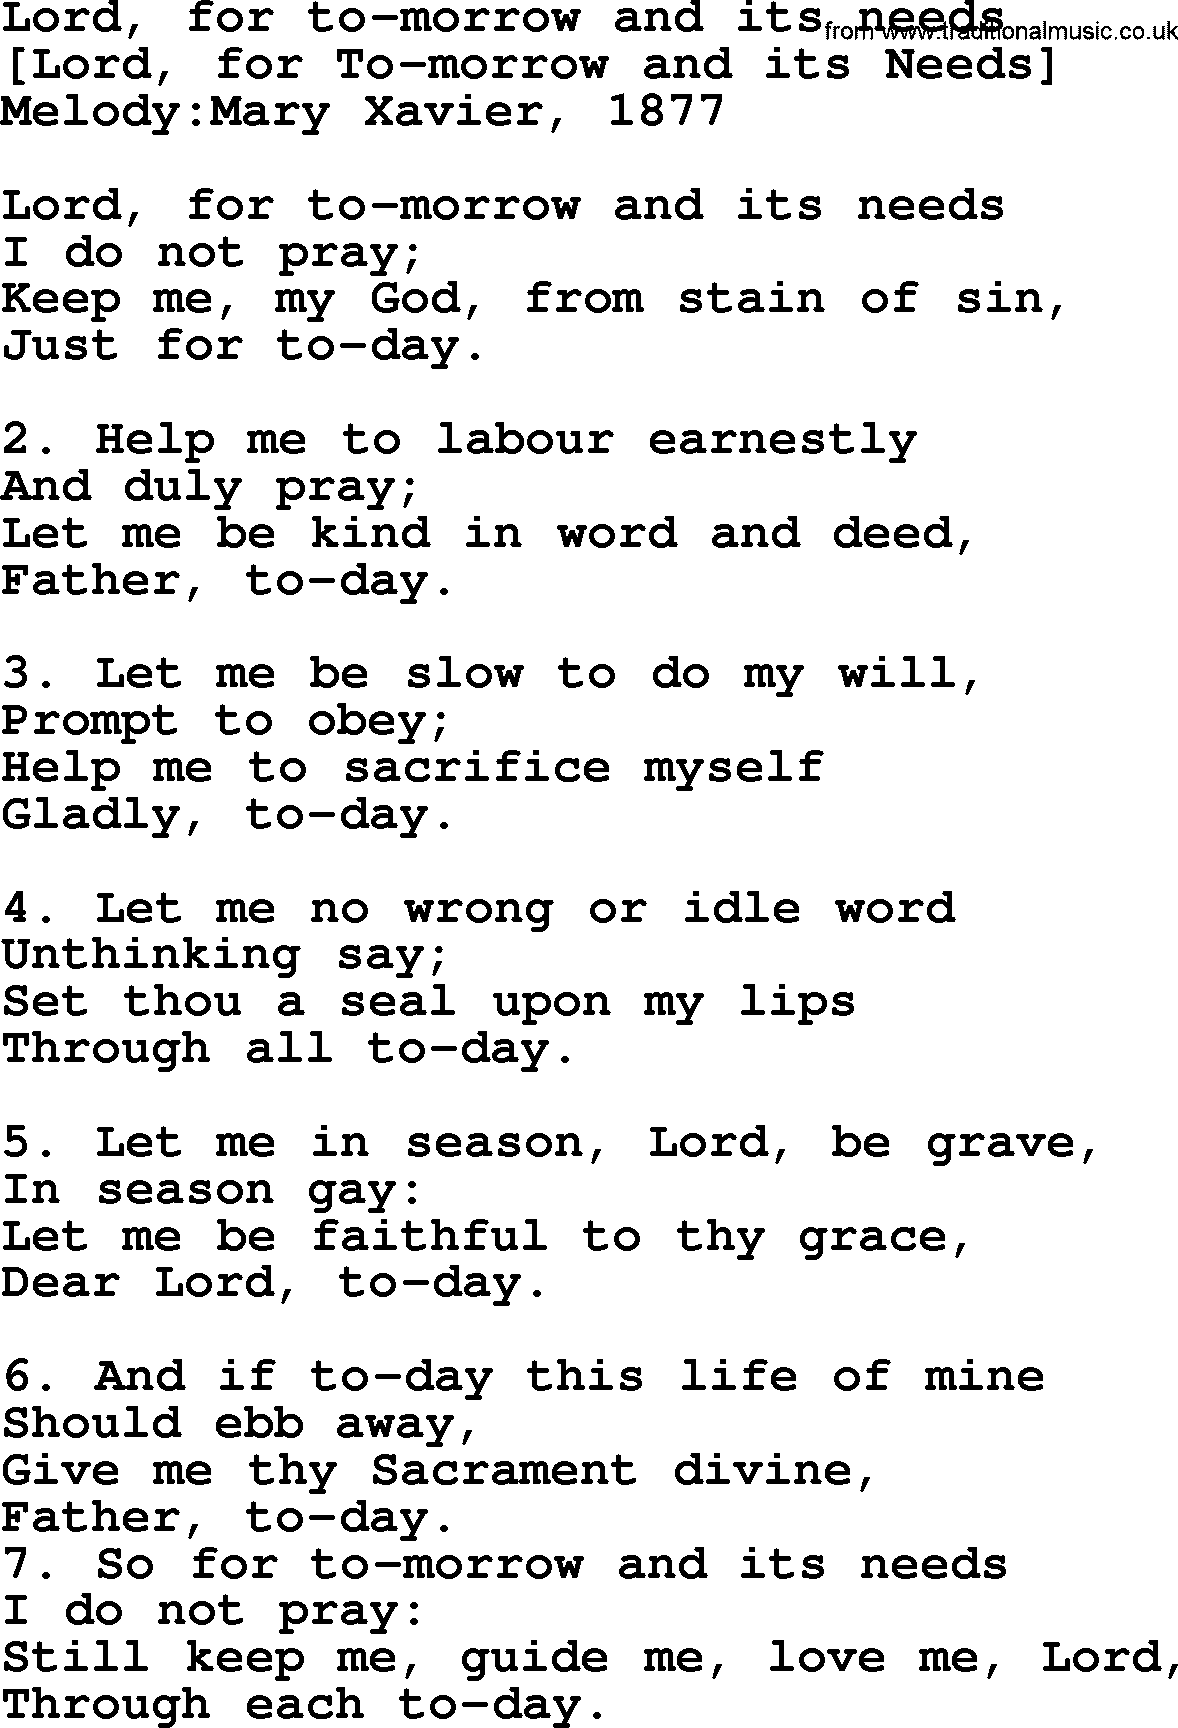 Old English Song: Lord, For To-Morrow And Its Needs lyrics